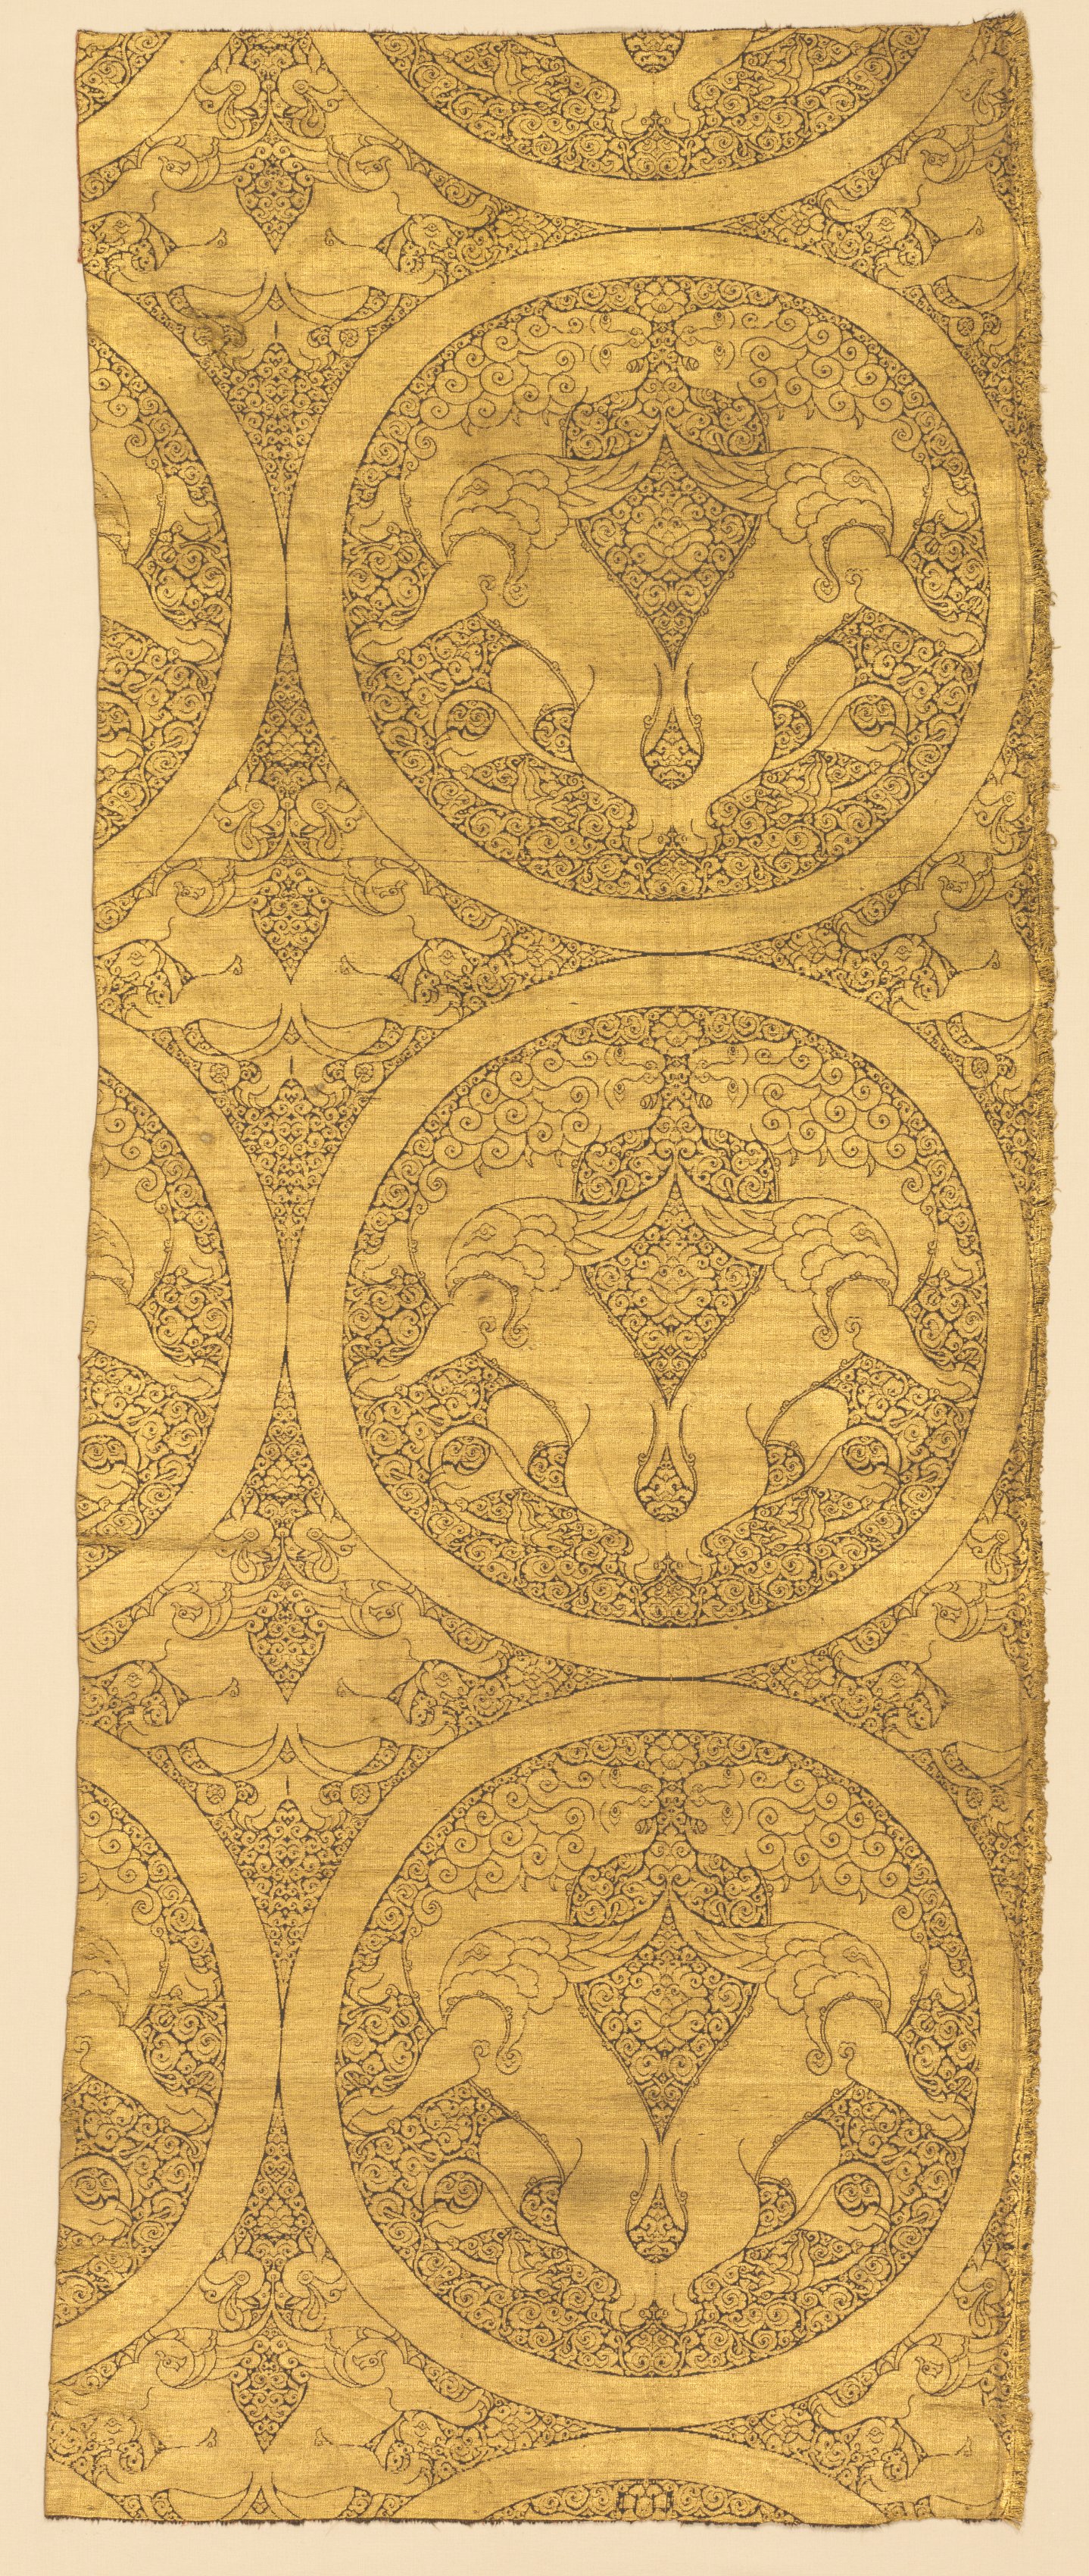 Cloth of gold with winged lions and griffins